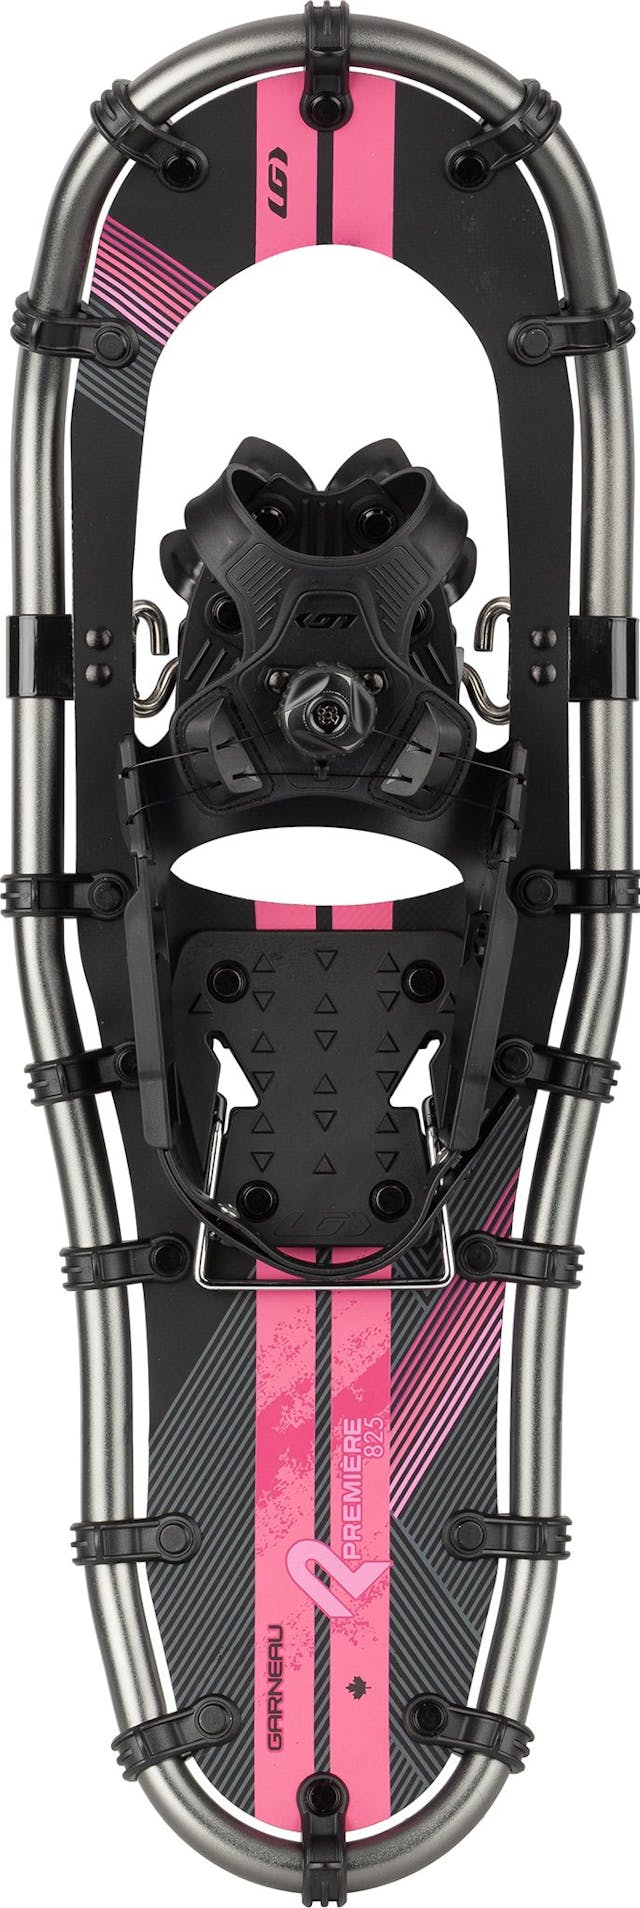 Product image for Premiere Snowshoes - Women's